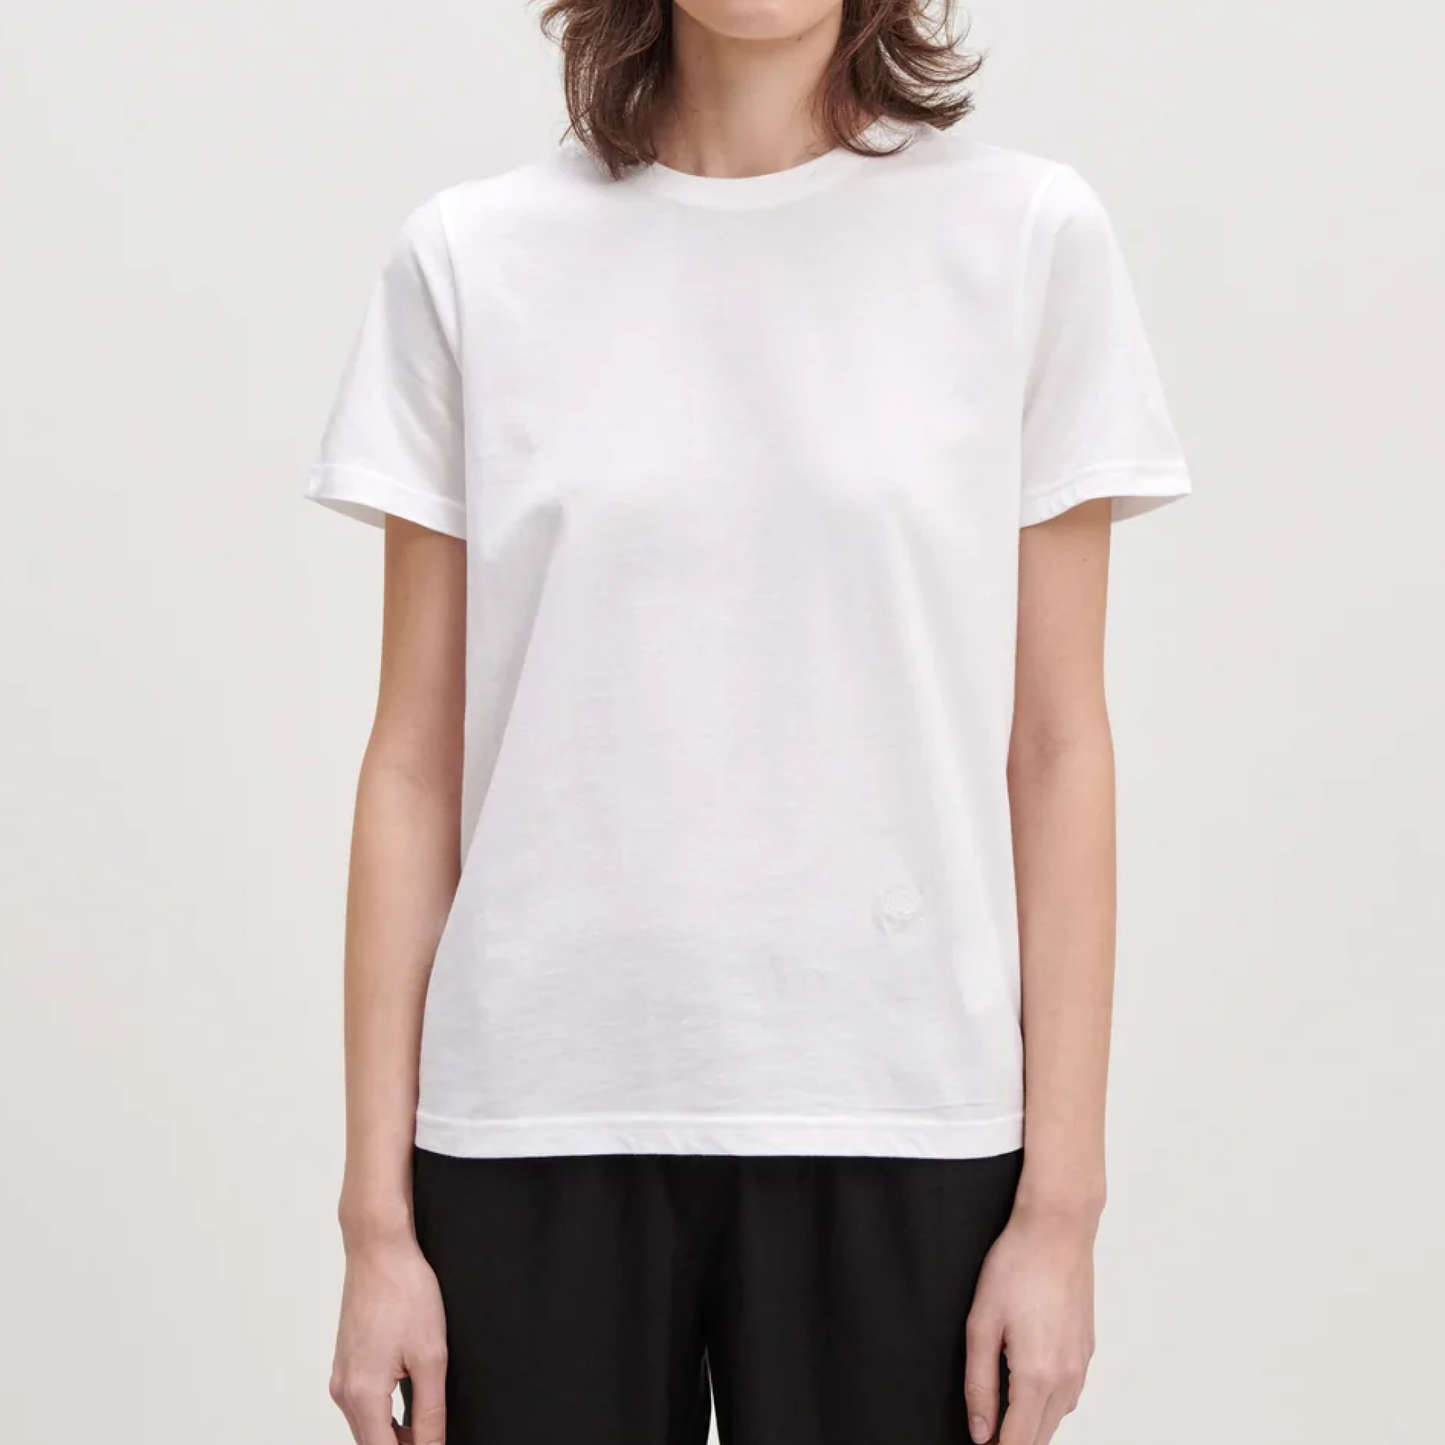 Andy T-Shirt, White